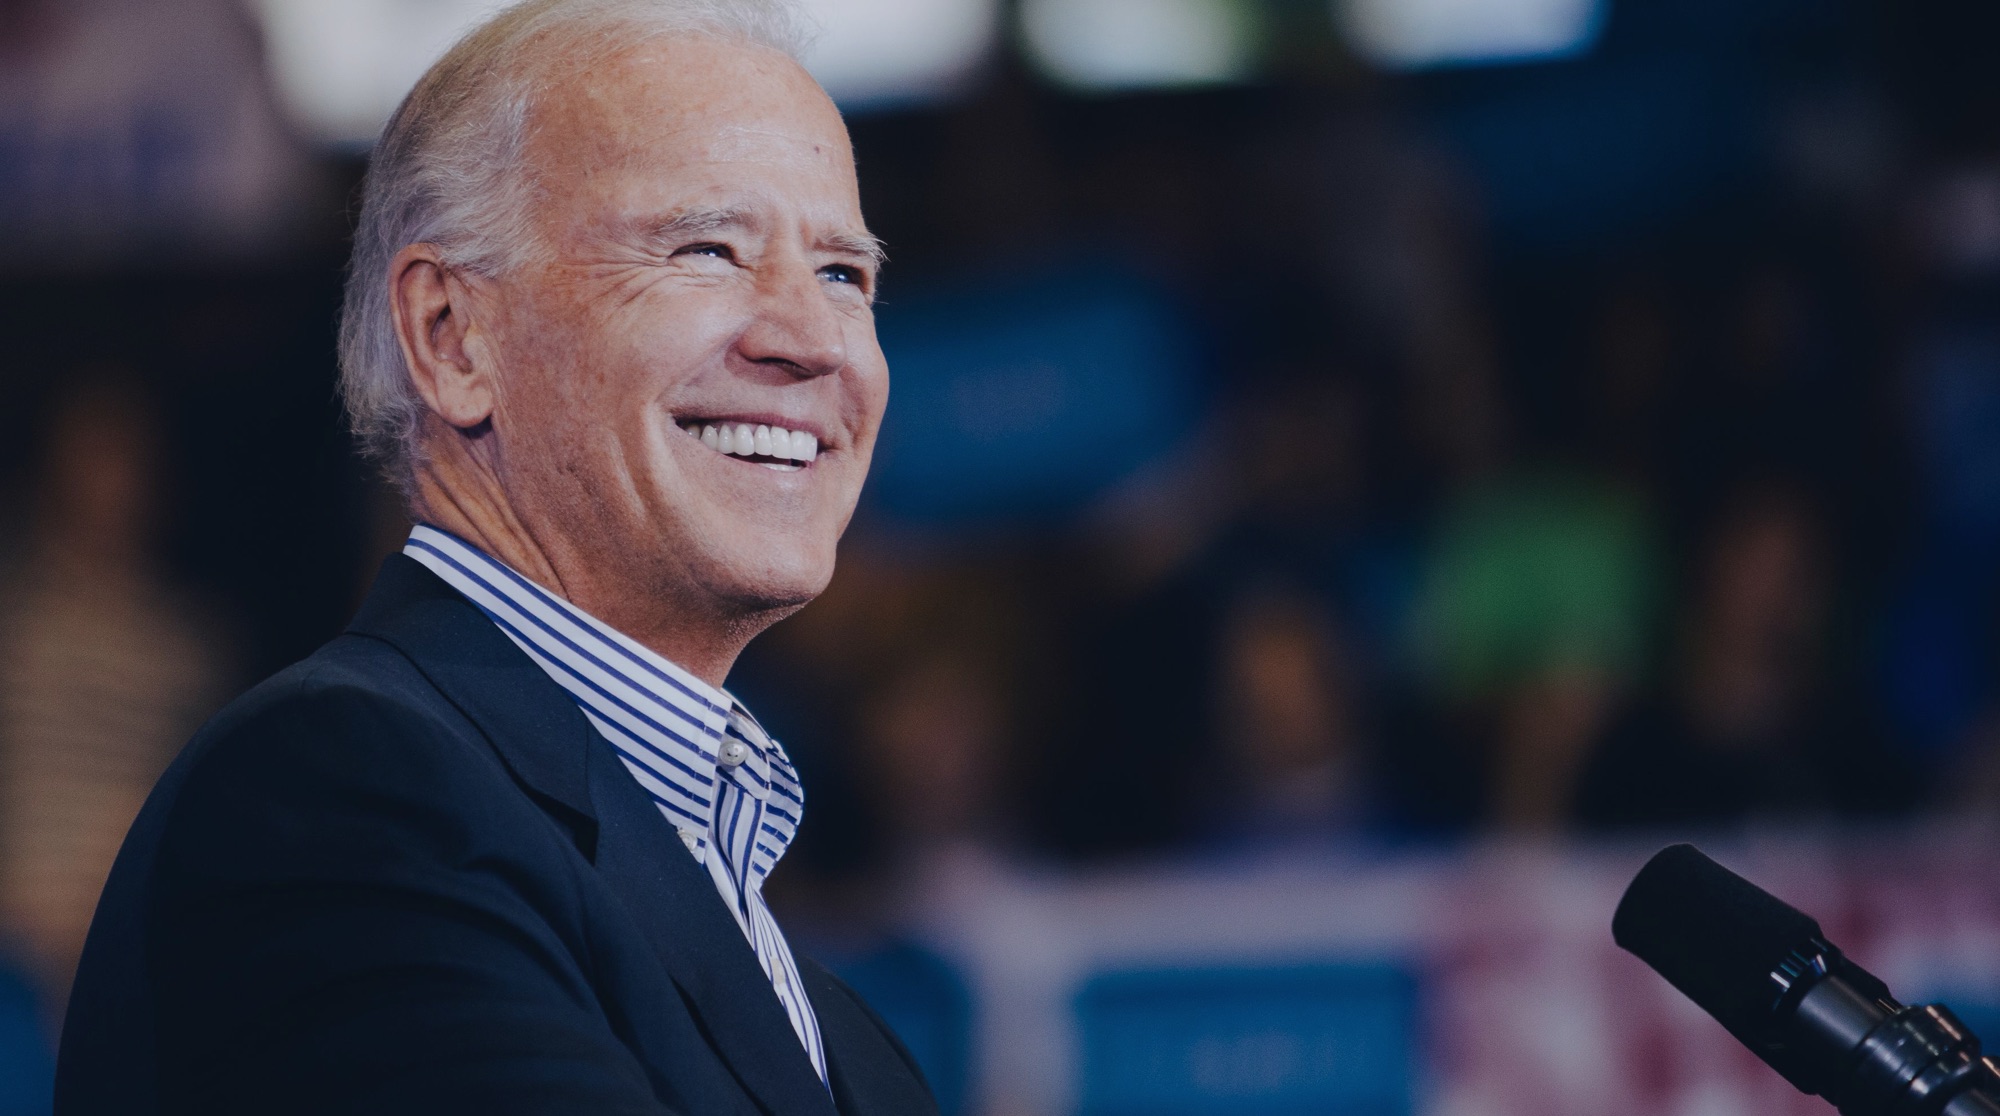 Joe Biden smiling while standing at a podium, in front of a large crowd blurred in the background.